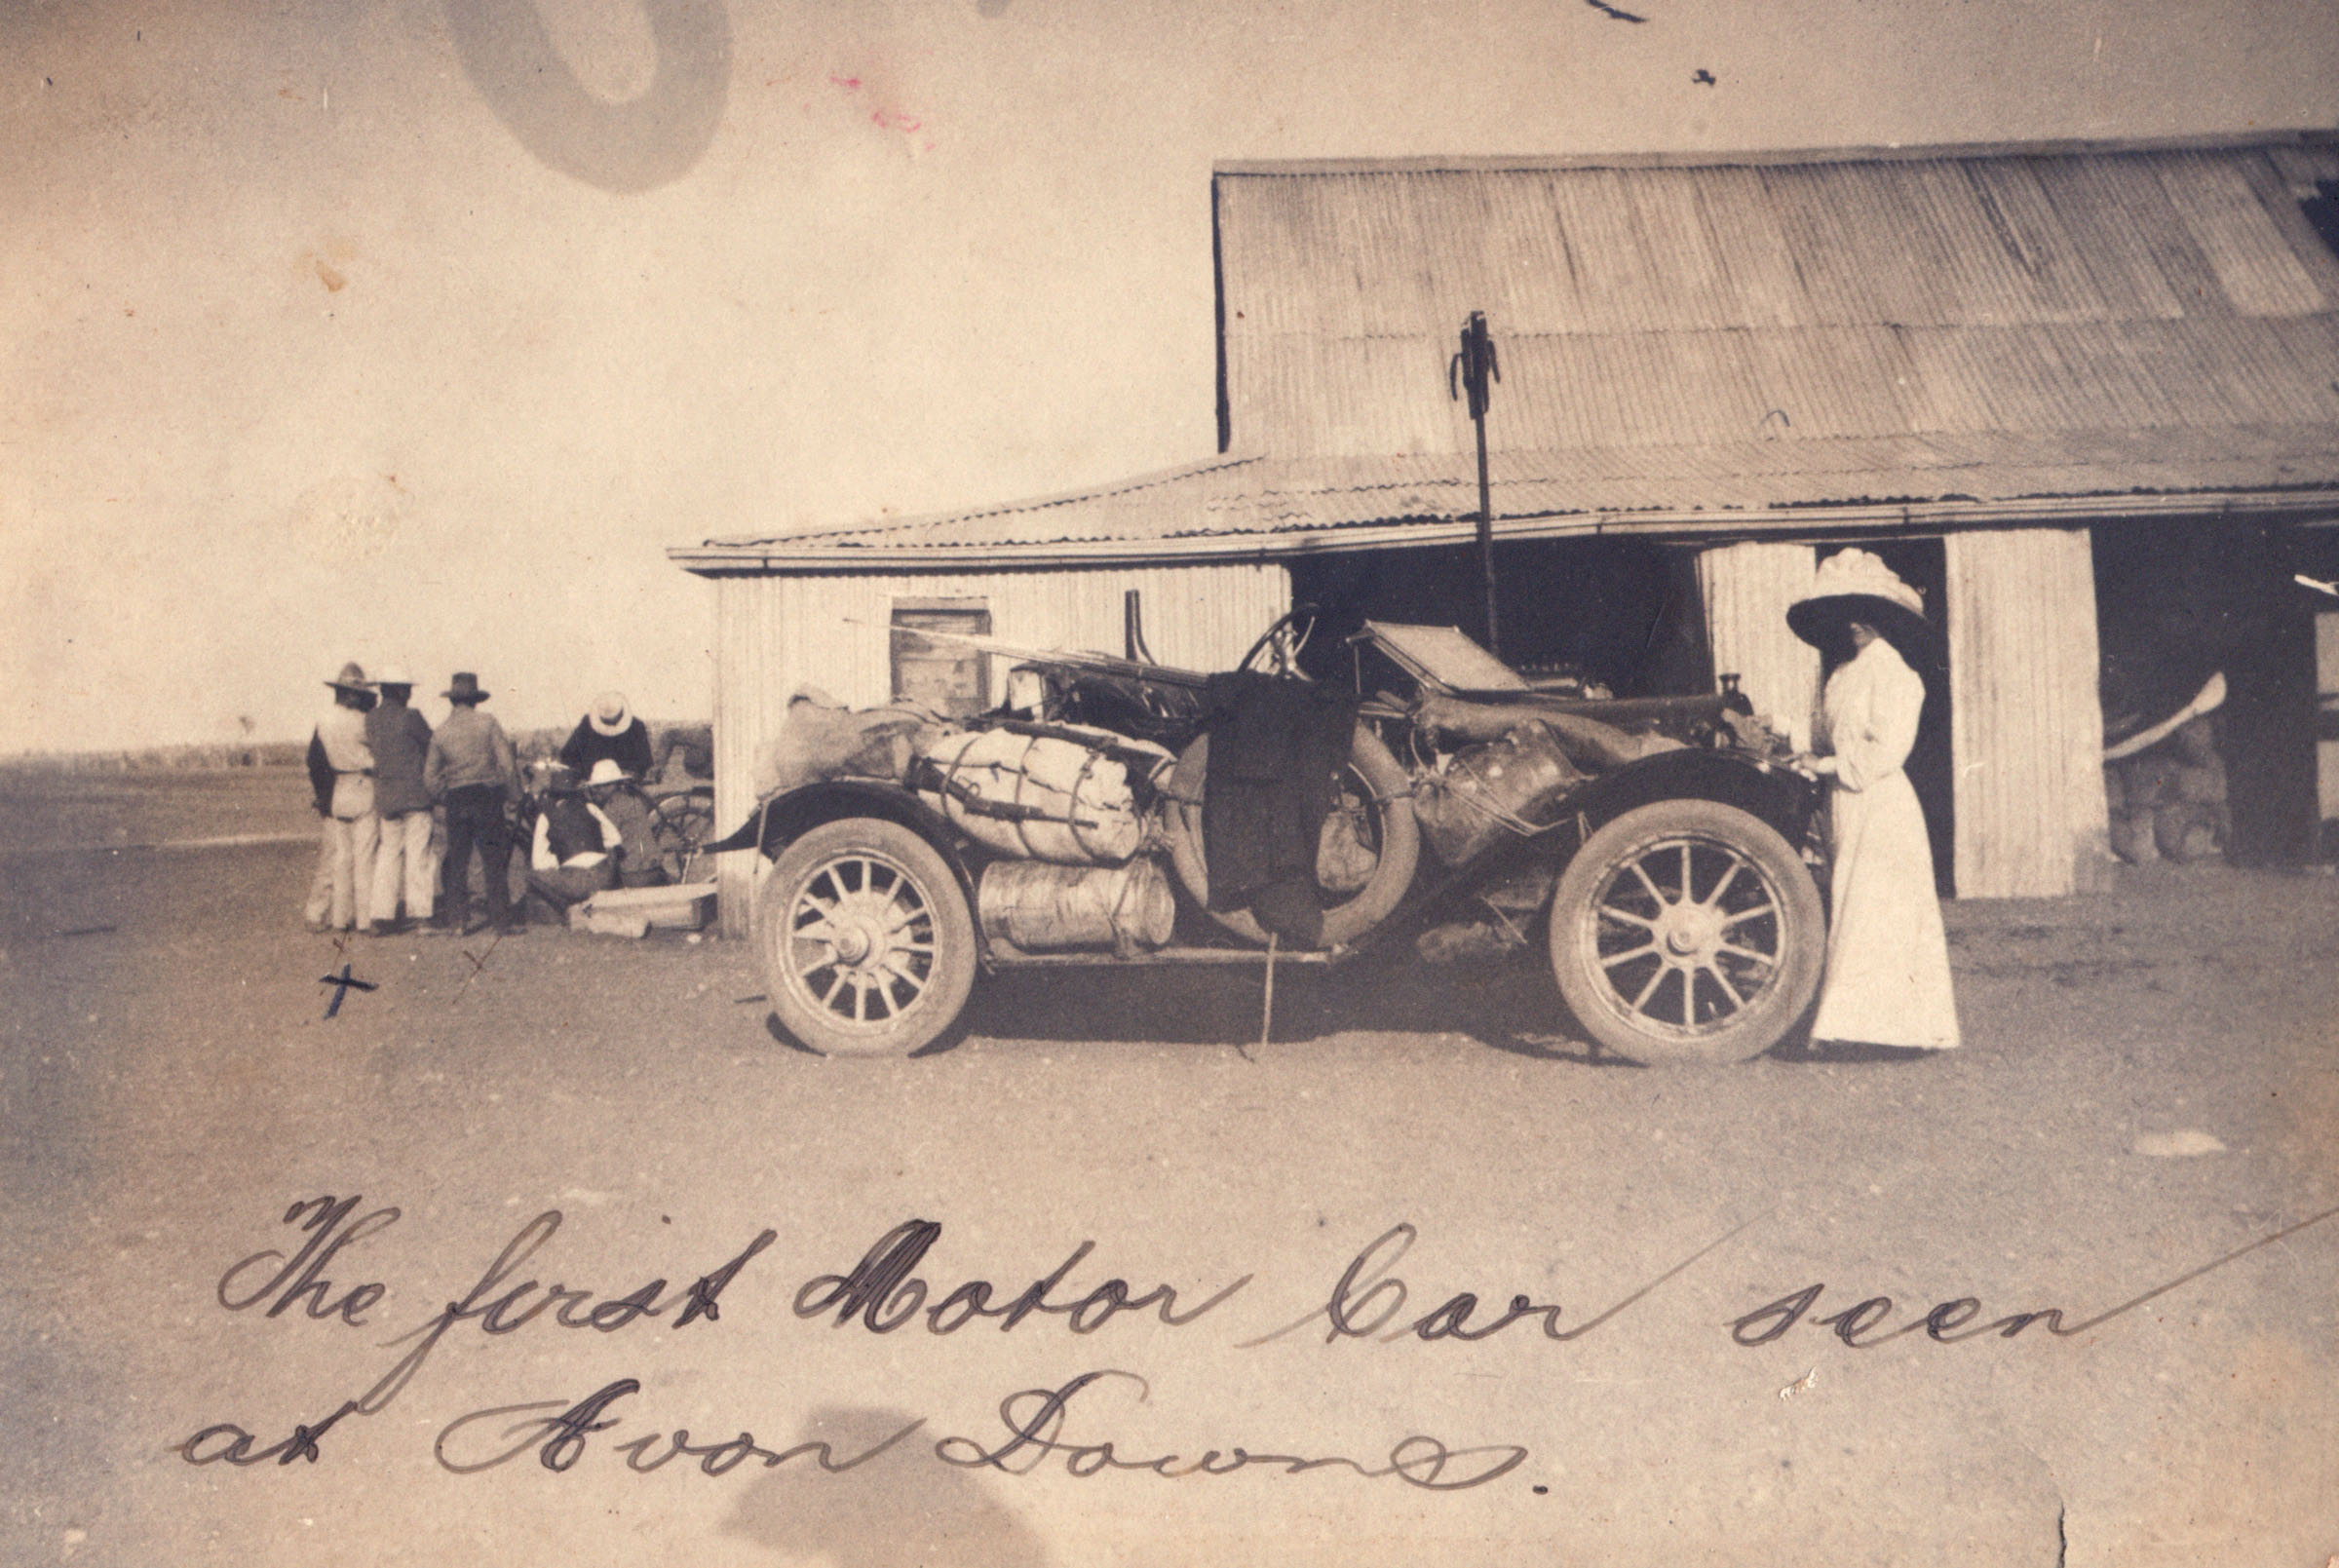 The first motor car seen at Avon Downs Station, Northern Territory, c. 1910 (Z241-211).